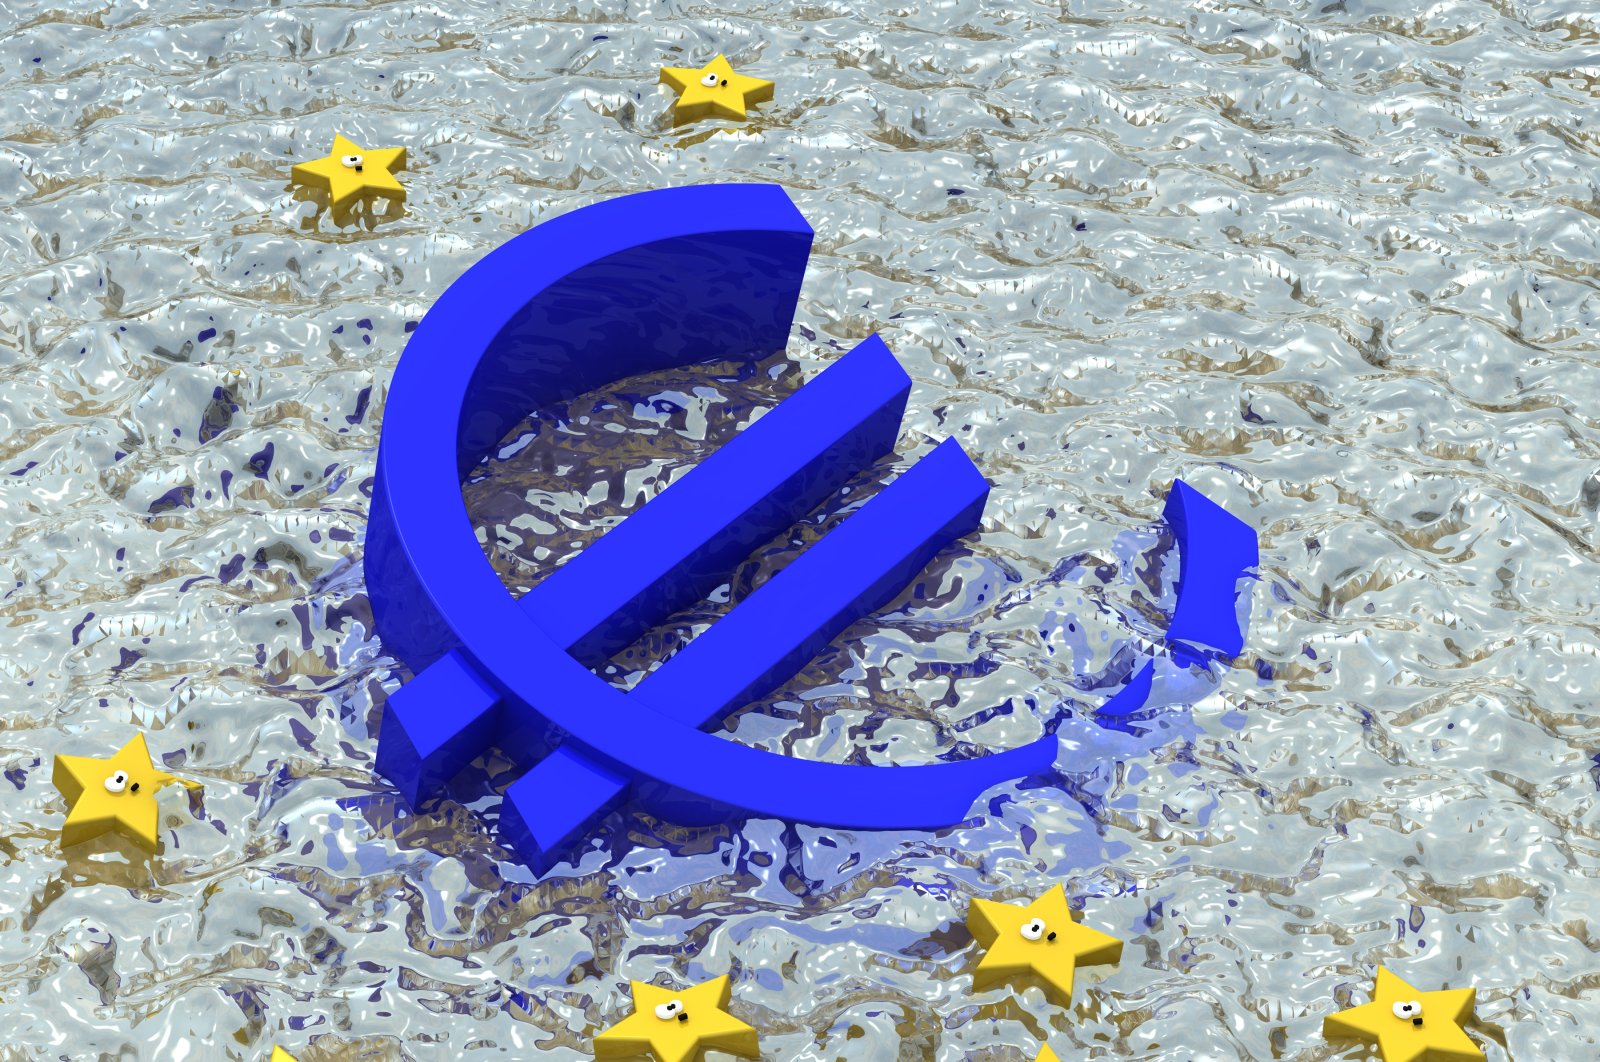 The rookie leaders of the European Union are determined to plunge the entire world into a deeper energy bottleneck and food inflation. (Shutterstock Photo)